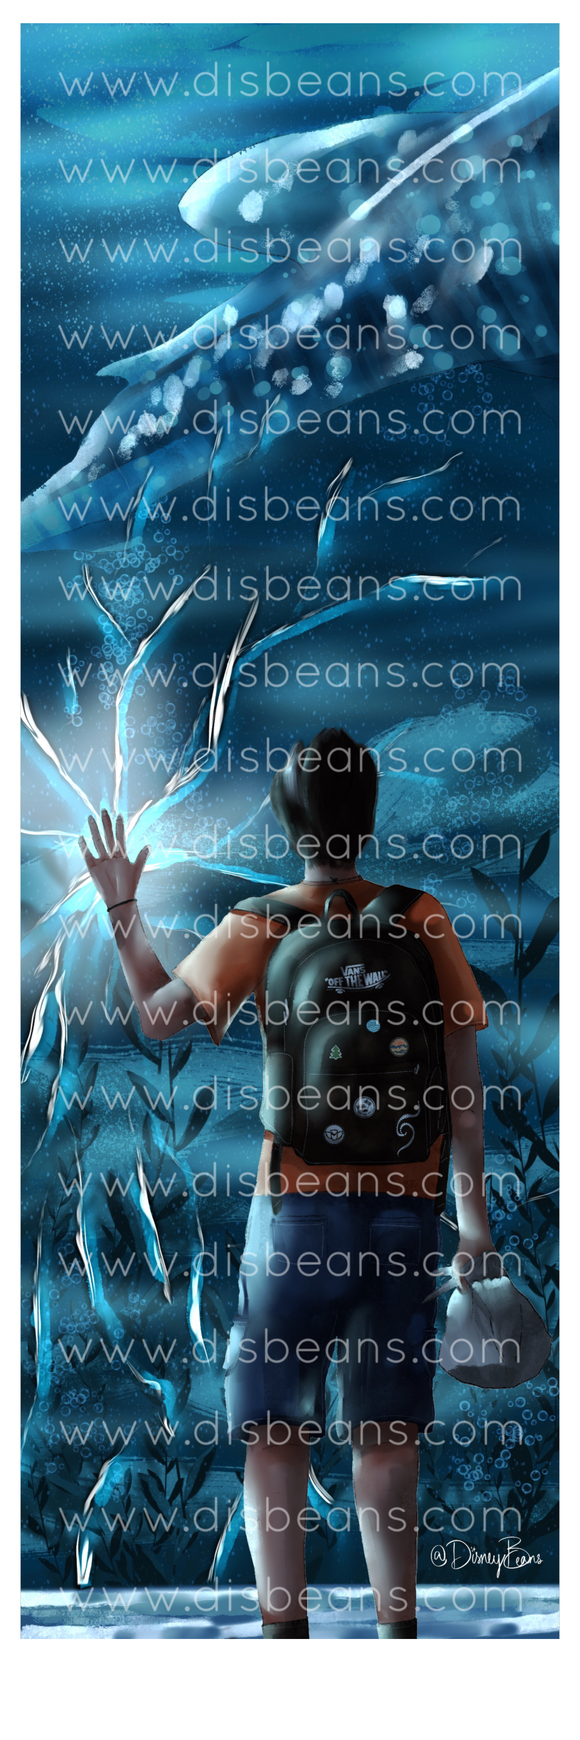 Georgia Aquarium Promise - Bookmark 2 W X 6 H inches BOOKMARK or Glossy Sticker Percy Jackson PJO and the Olympians